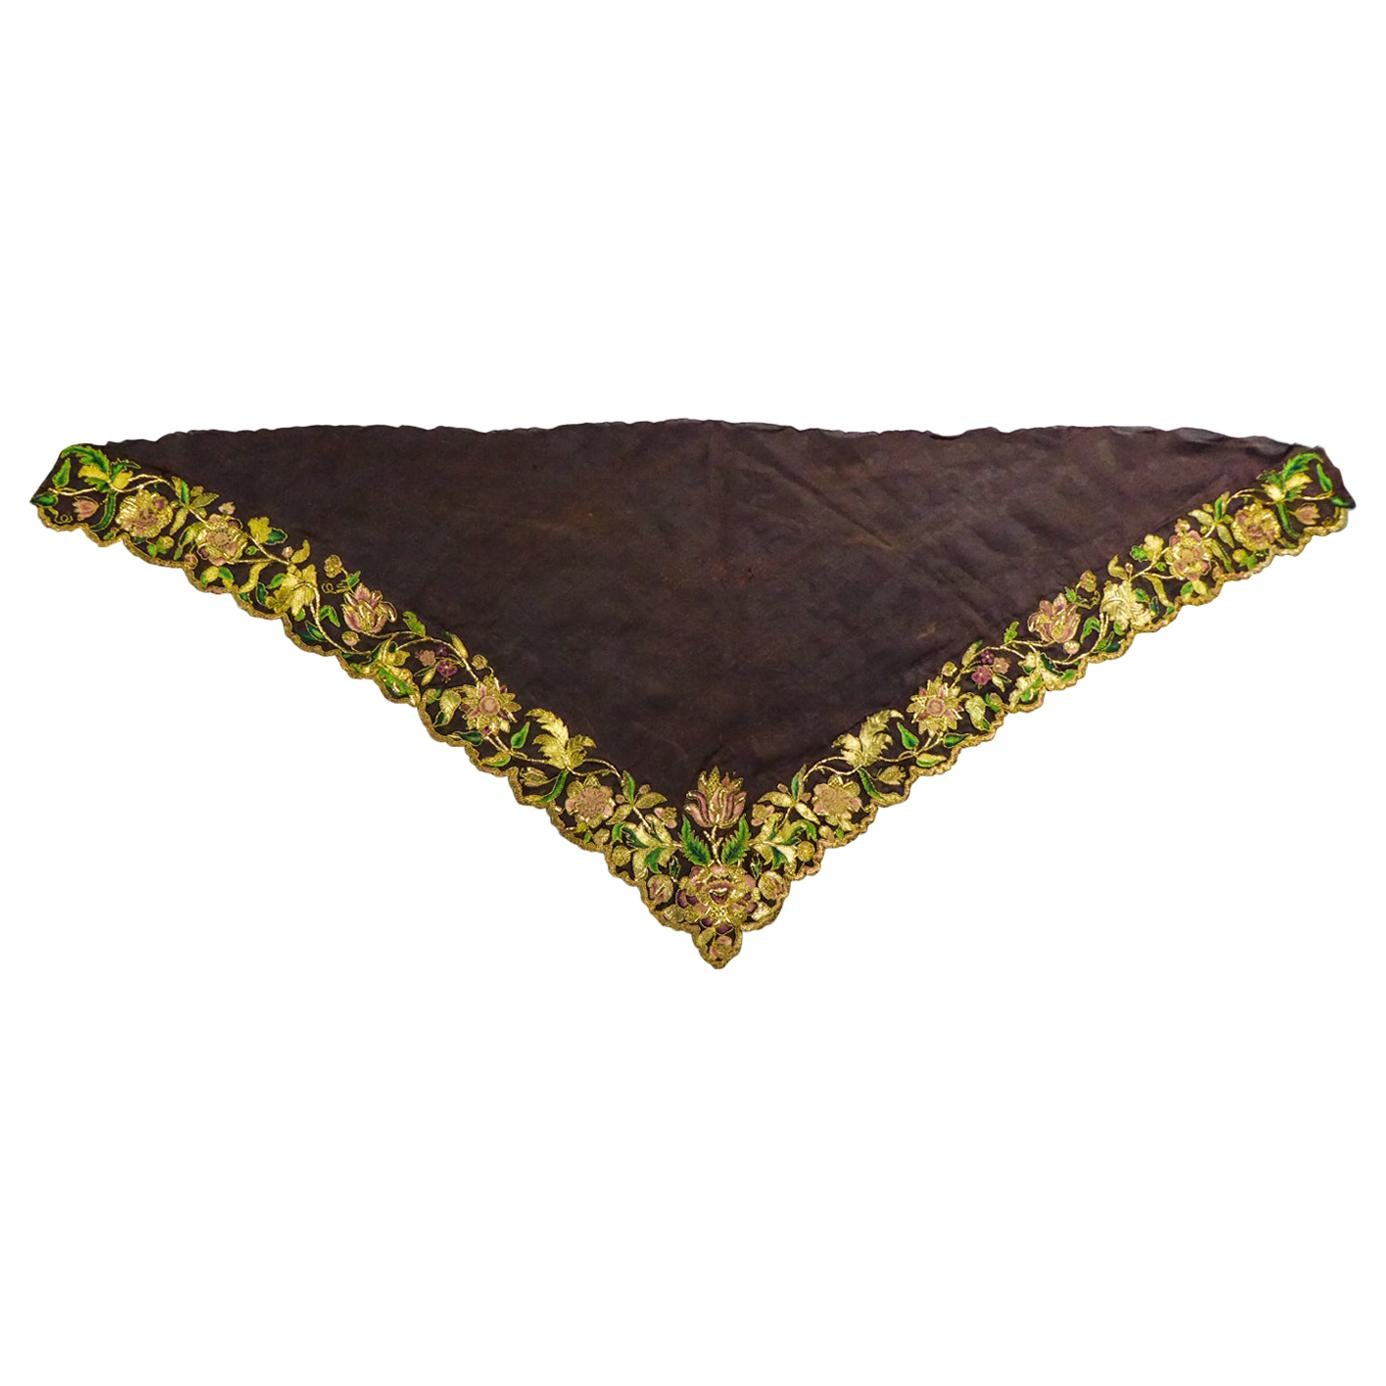 A gold and silk embroidered Fichu or Palatine Fichu Scarf - Europe - Circa 1700